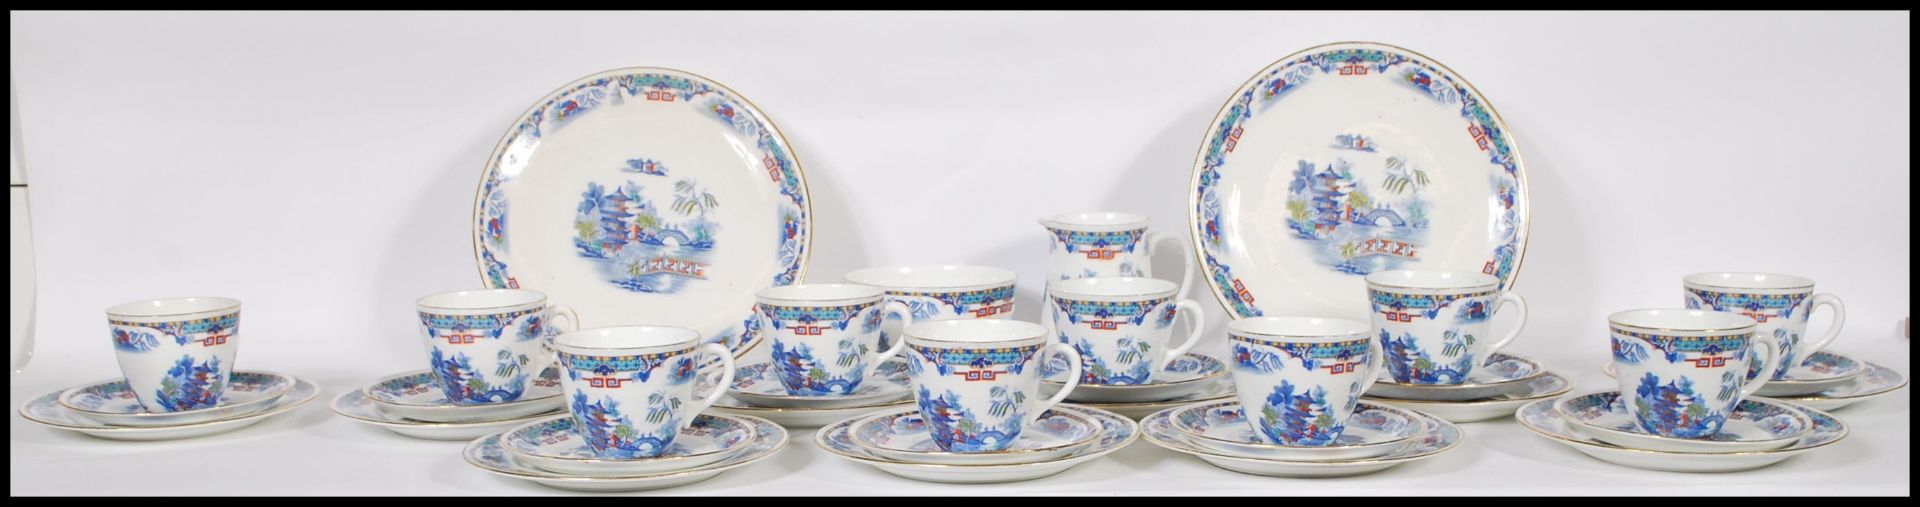 A 20th Century Staffordshire blue and white tea service in the Willow pattern, having red and